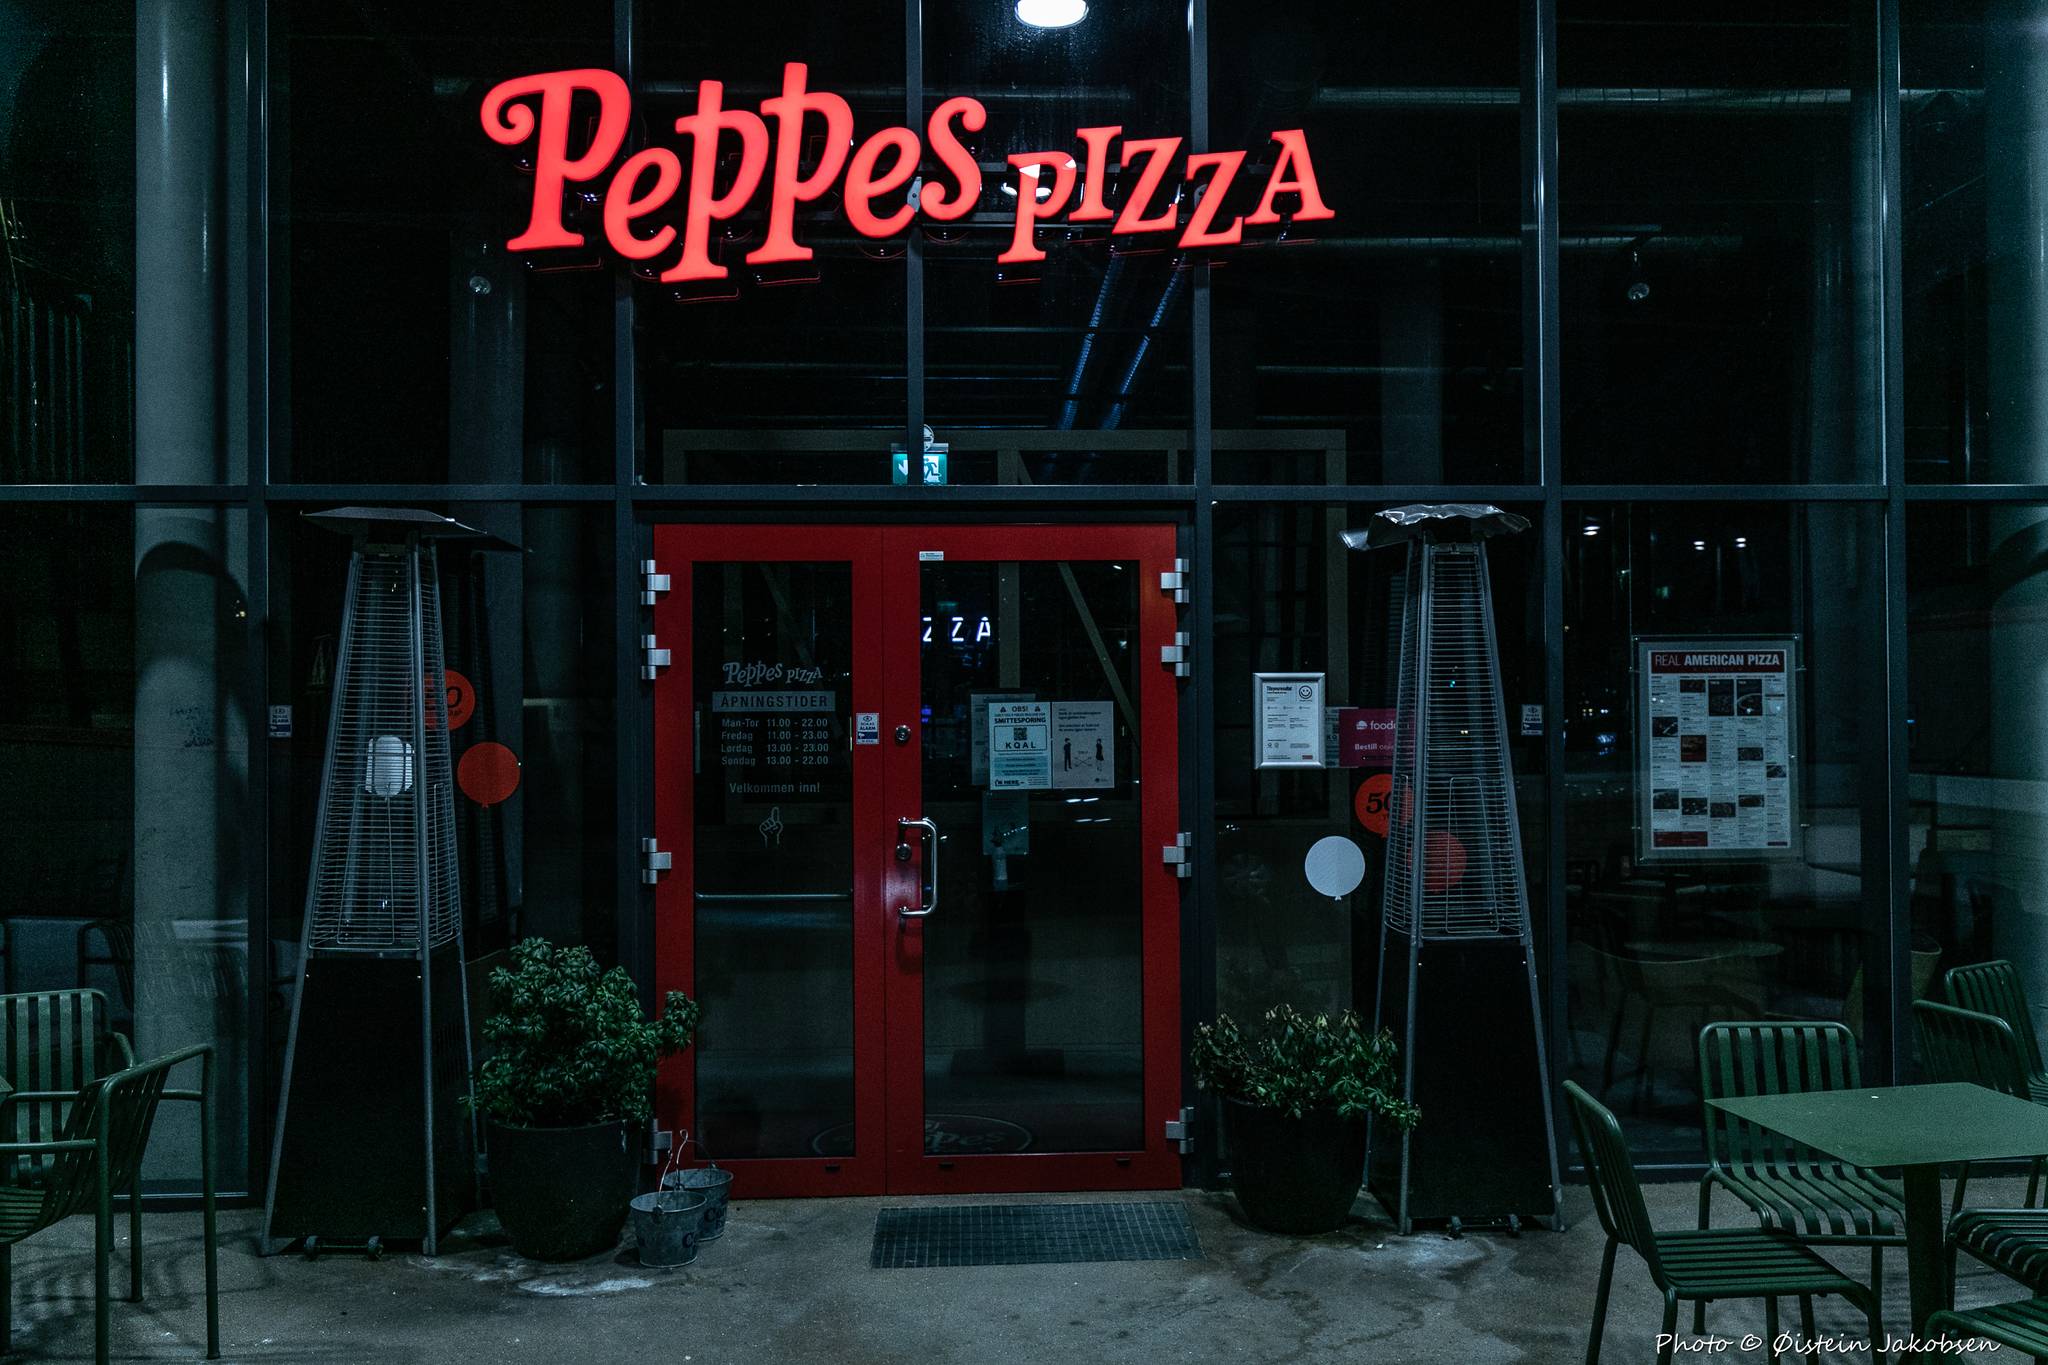 &mdash;Peppes Pizza - The Project